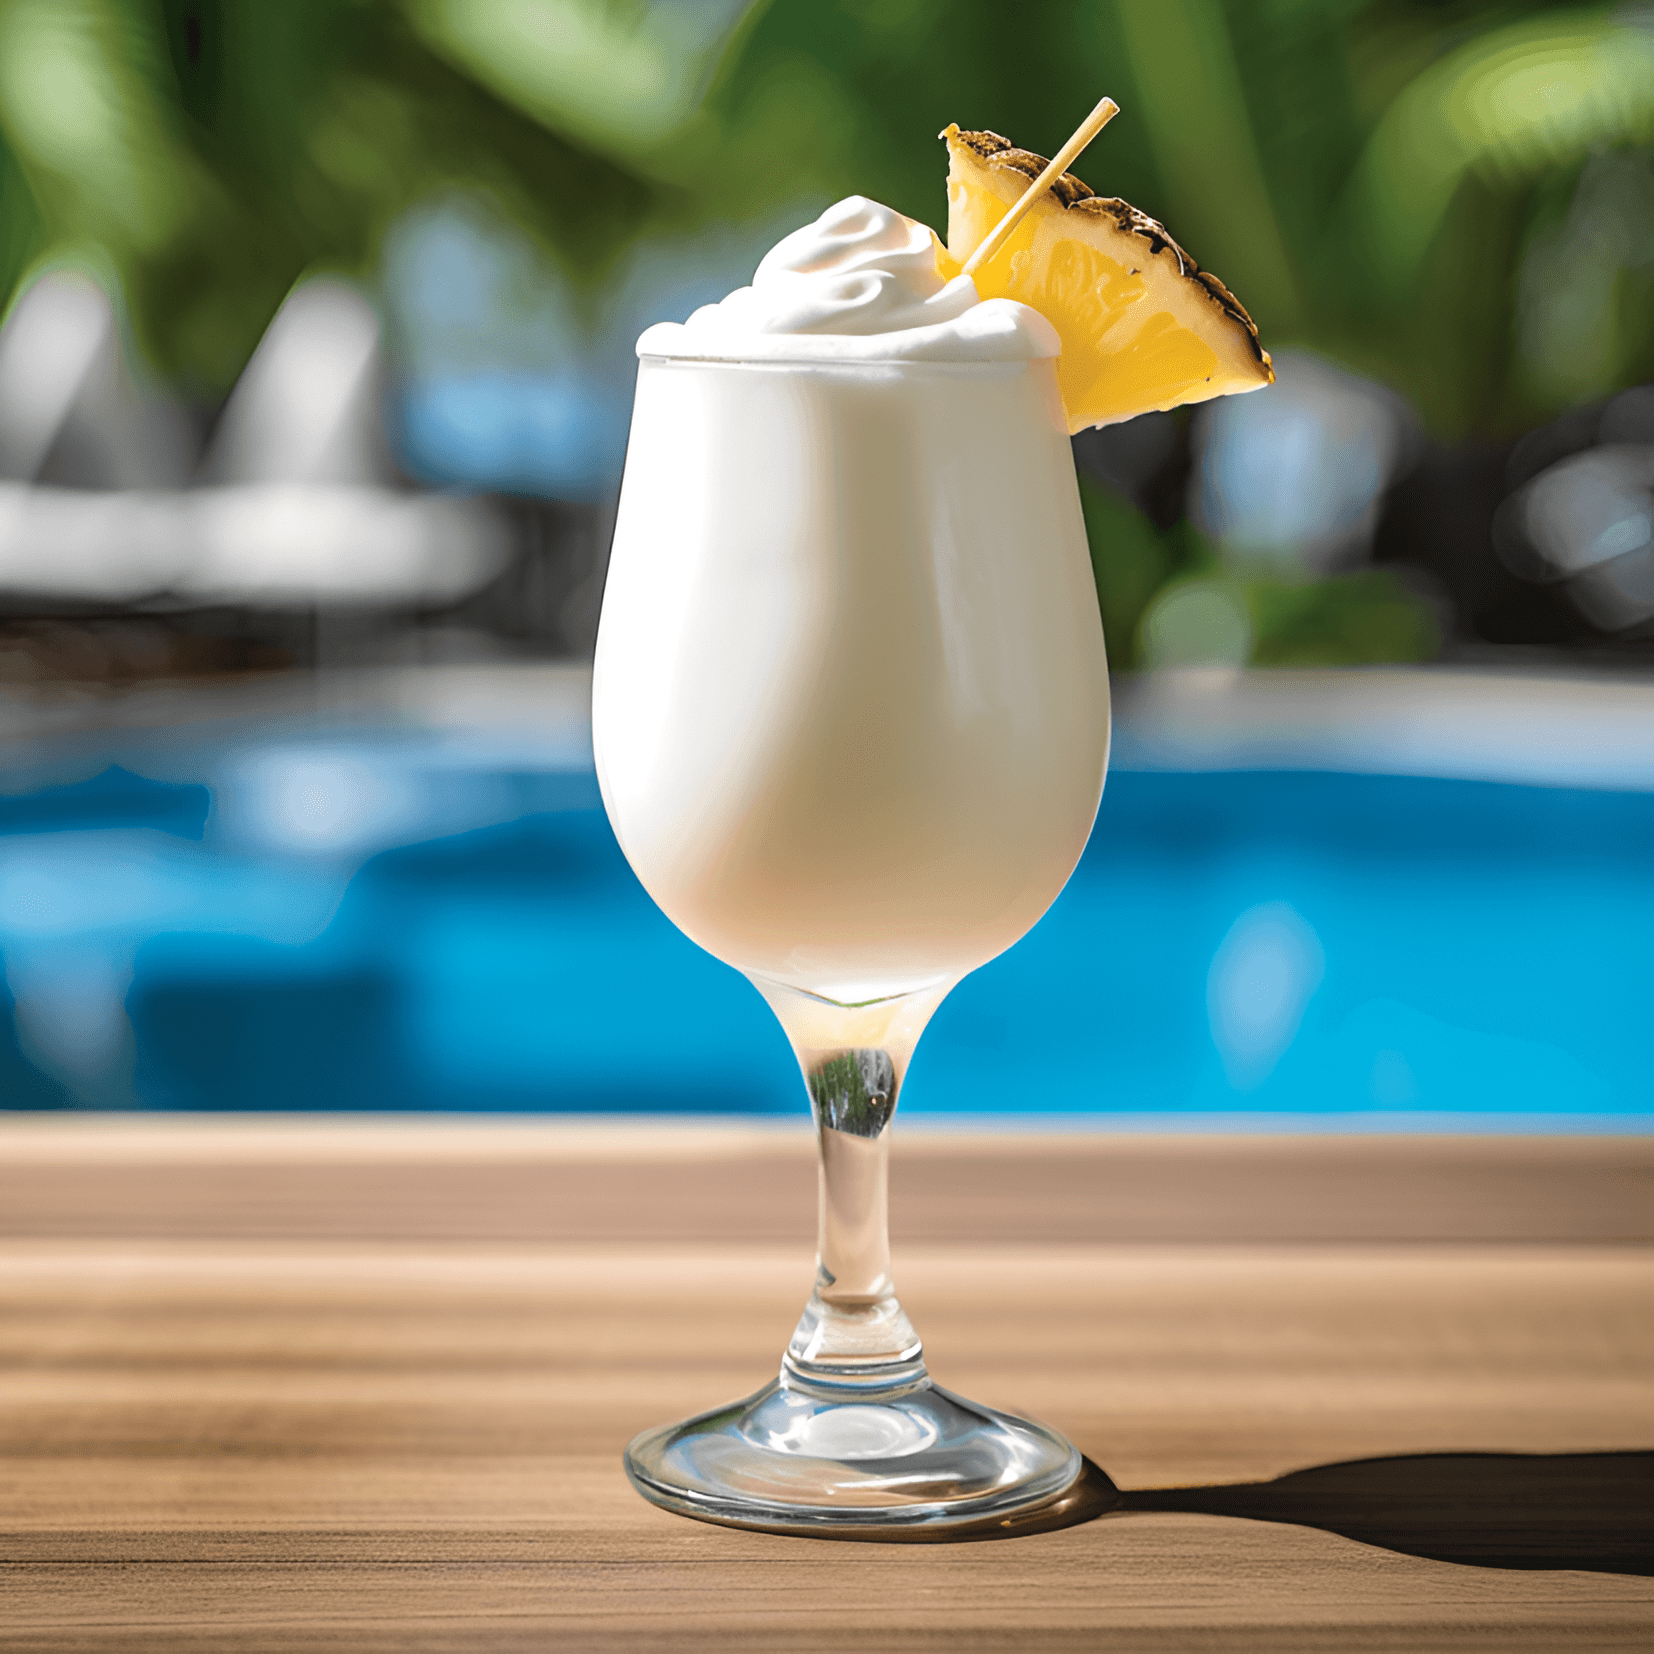 Whitecap Cocktail Recipe - The Whitecap cocktail is a delightful blend of sweet, sour, and fruity flavors. The drink is light and refreshing, with a hint of creaminess from the coconut milk. The tangy pineapple juice and zesty lime juice provide a perfect balance to the sweetness of the coconut milk and rum.